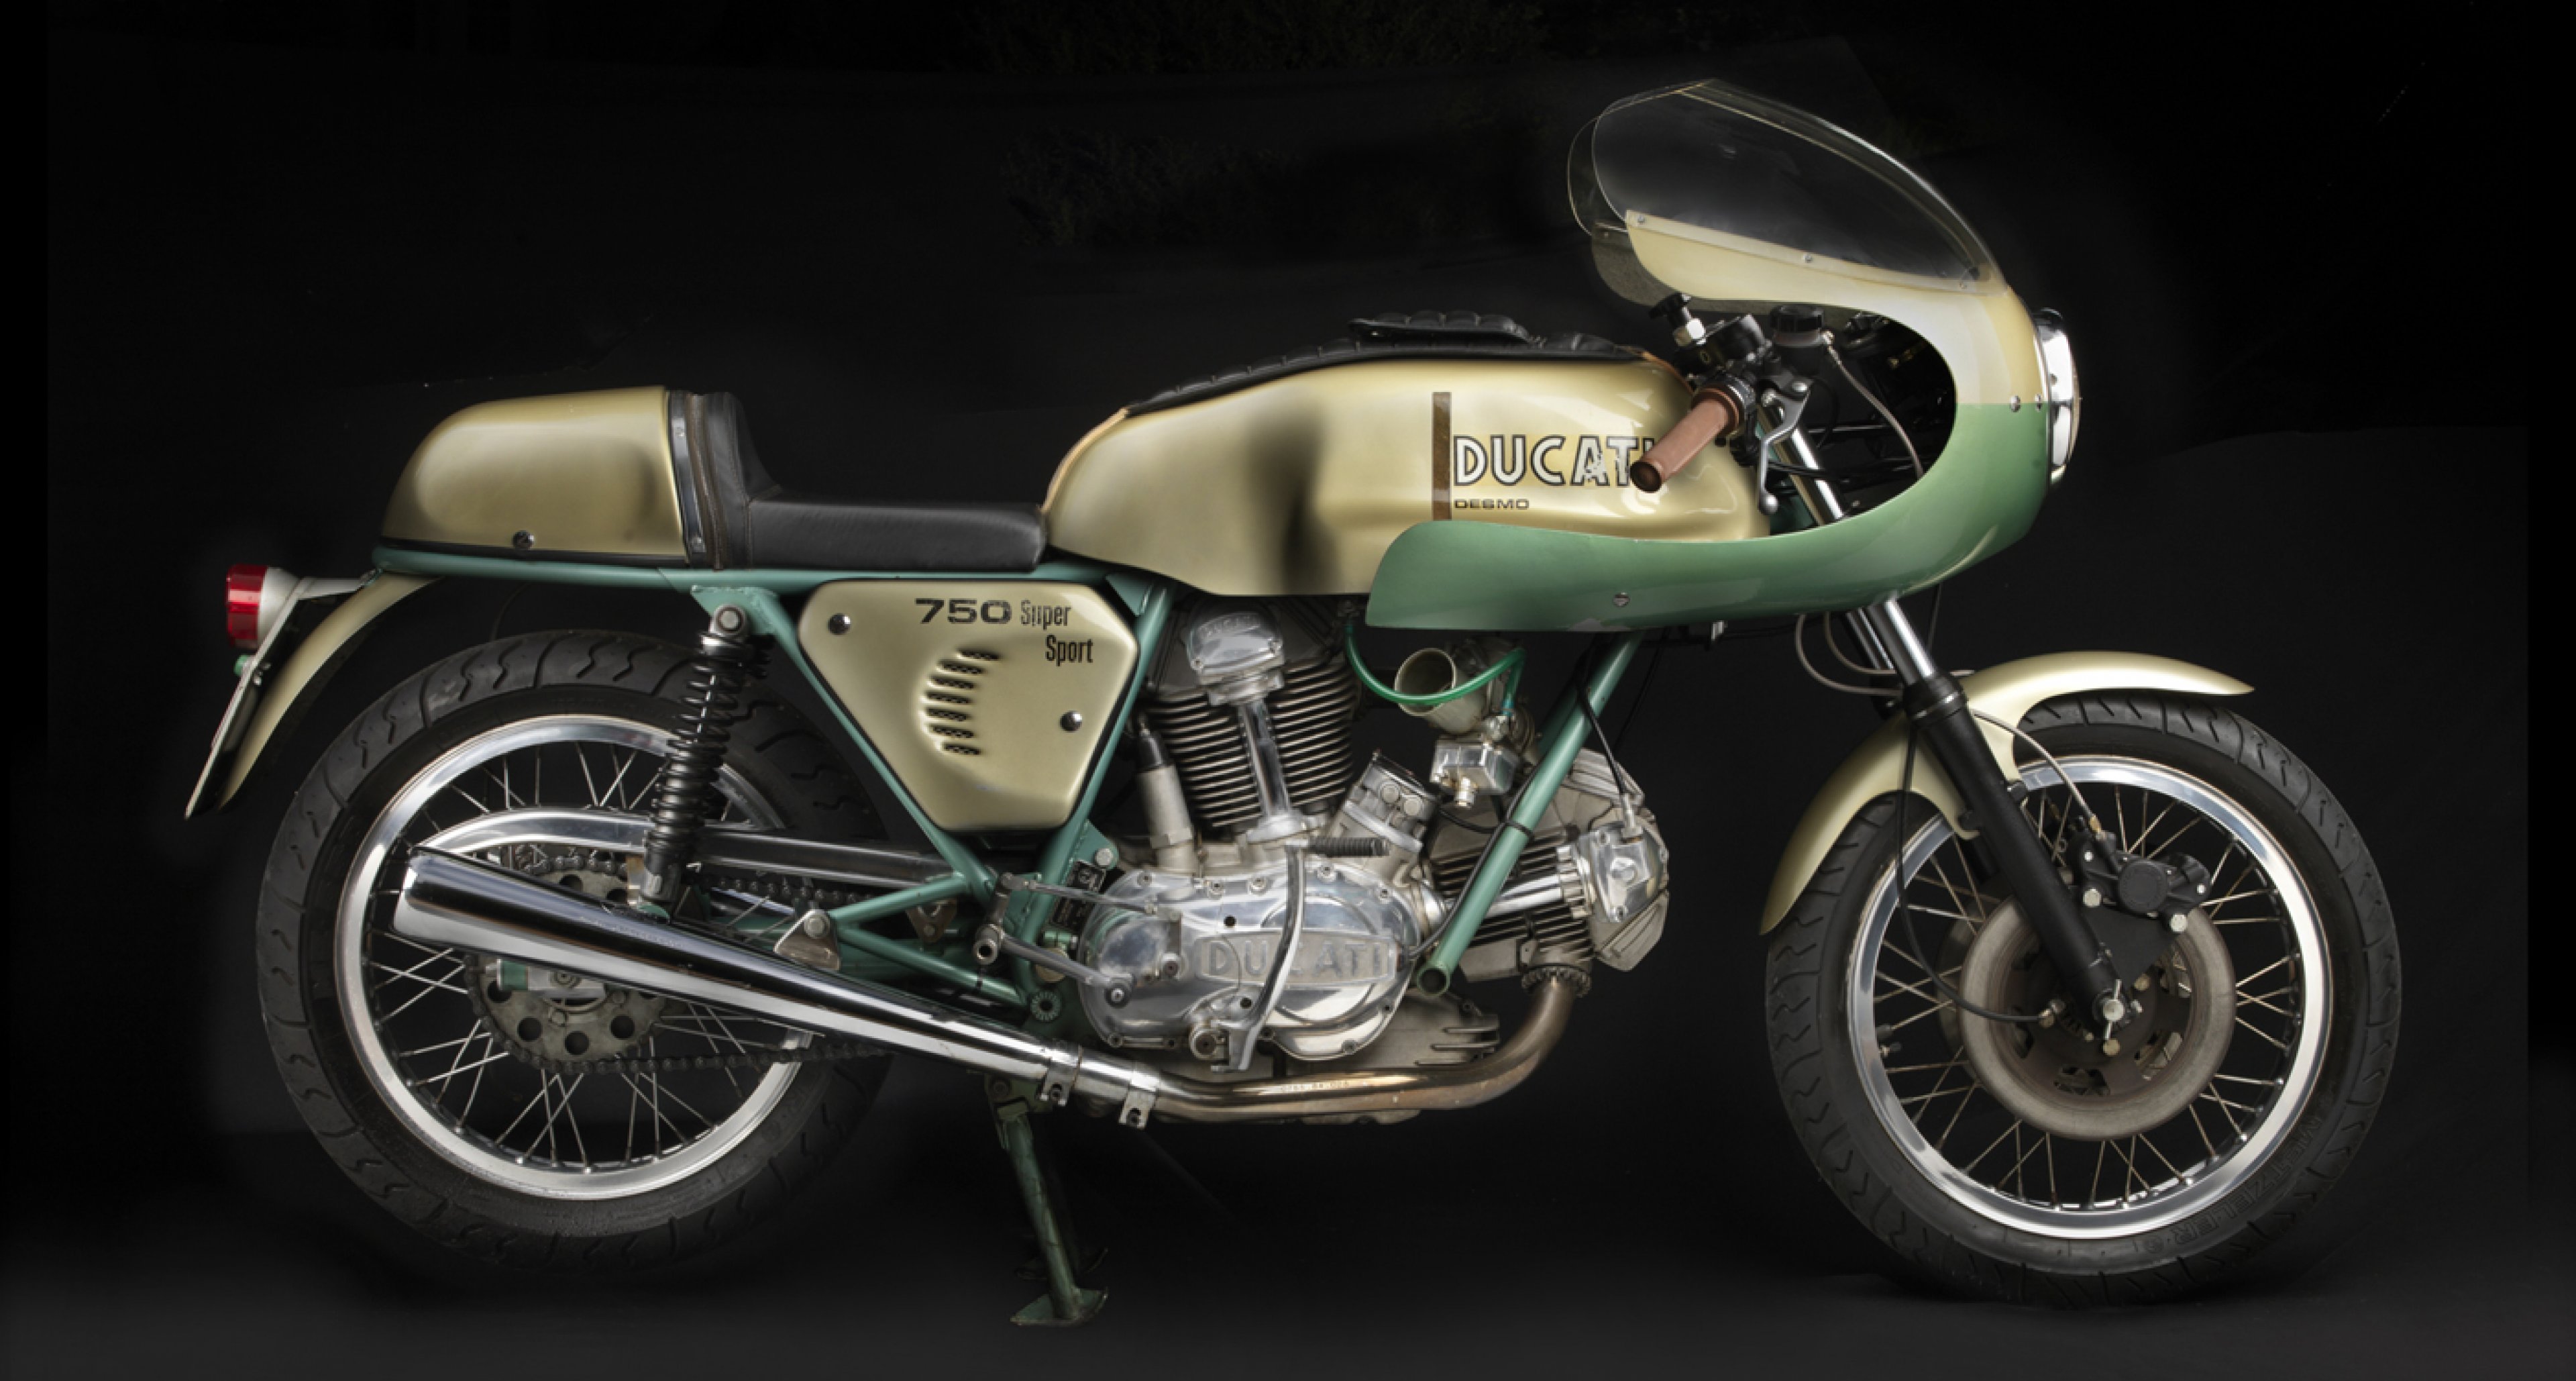 1974 Ducati 750 Super Sport. Collection of Somer and Loyce Hooker. Image © 2015 Peter Harholdt